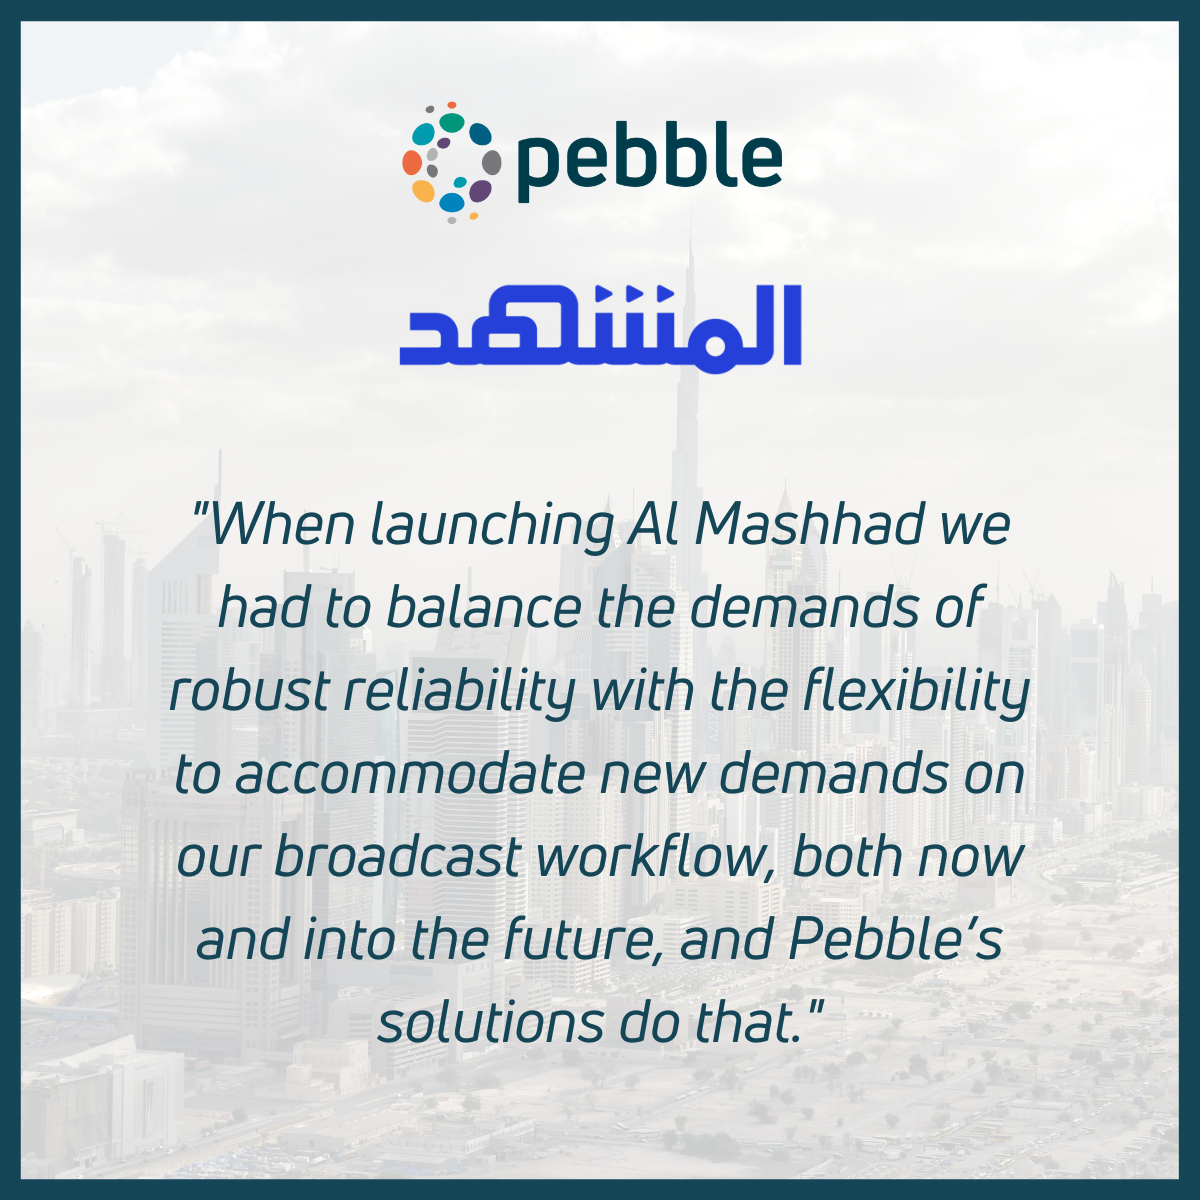 Pebble provides Al Mashhad with state-of-the-art channel solutions tkt1957.com